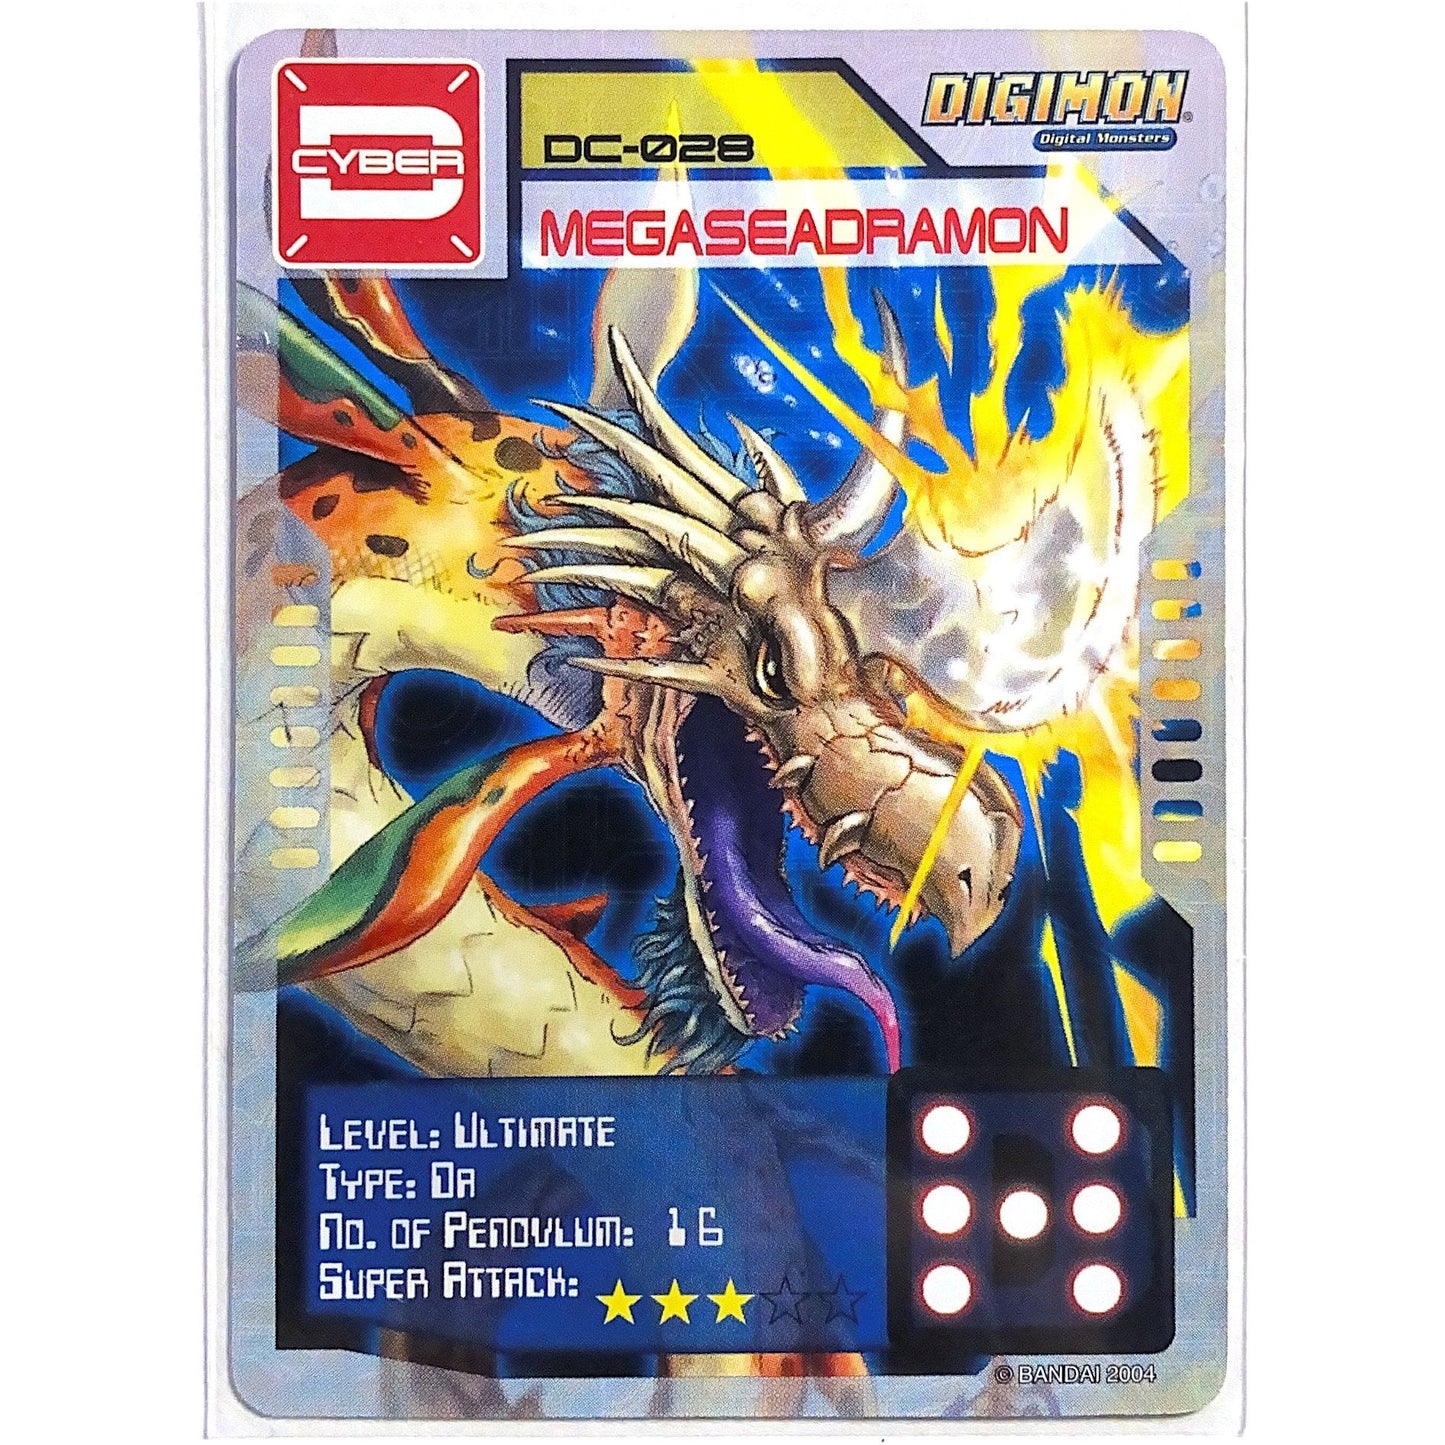  2004 D-Cyber Digimon Digivice Megaseadramon DC-028  Local Legends Cards & Collectibles